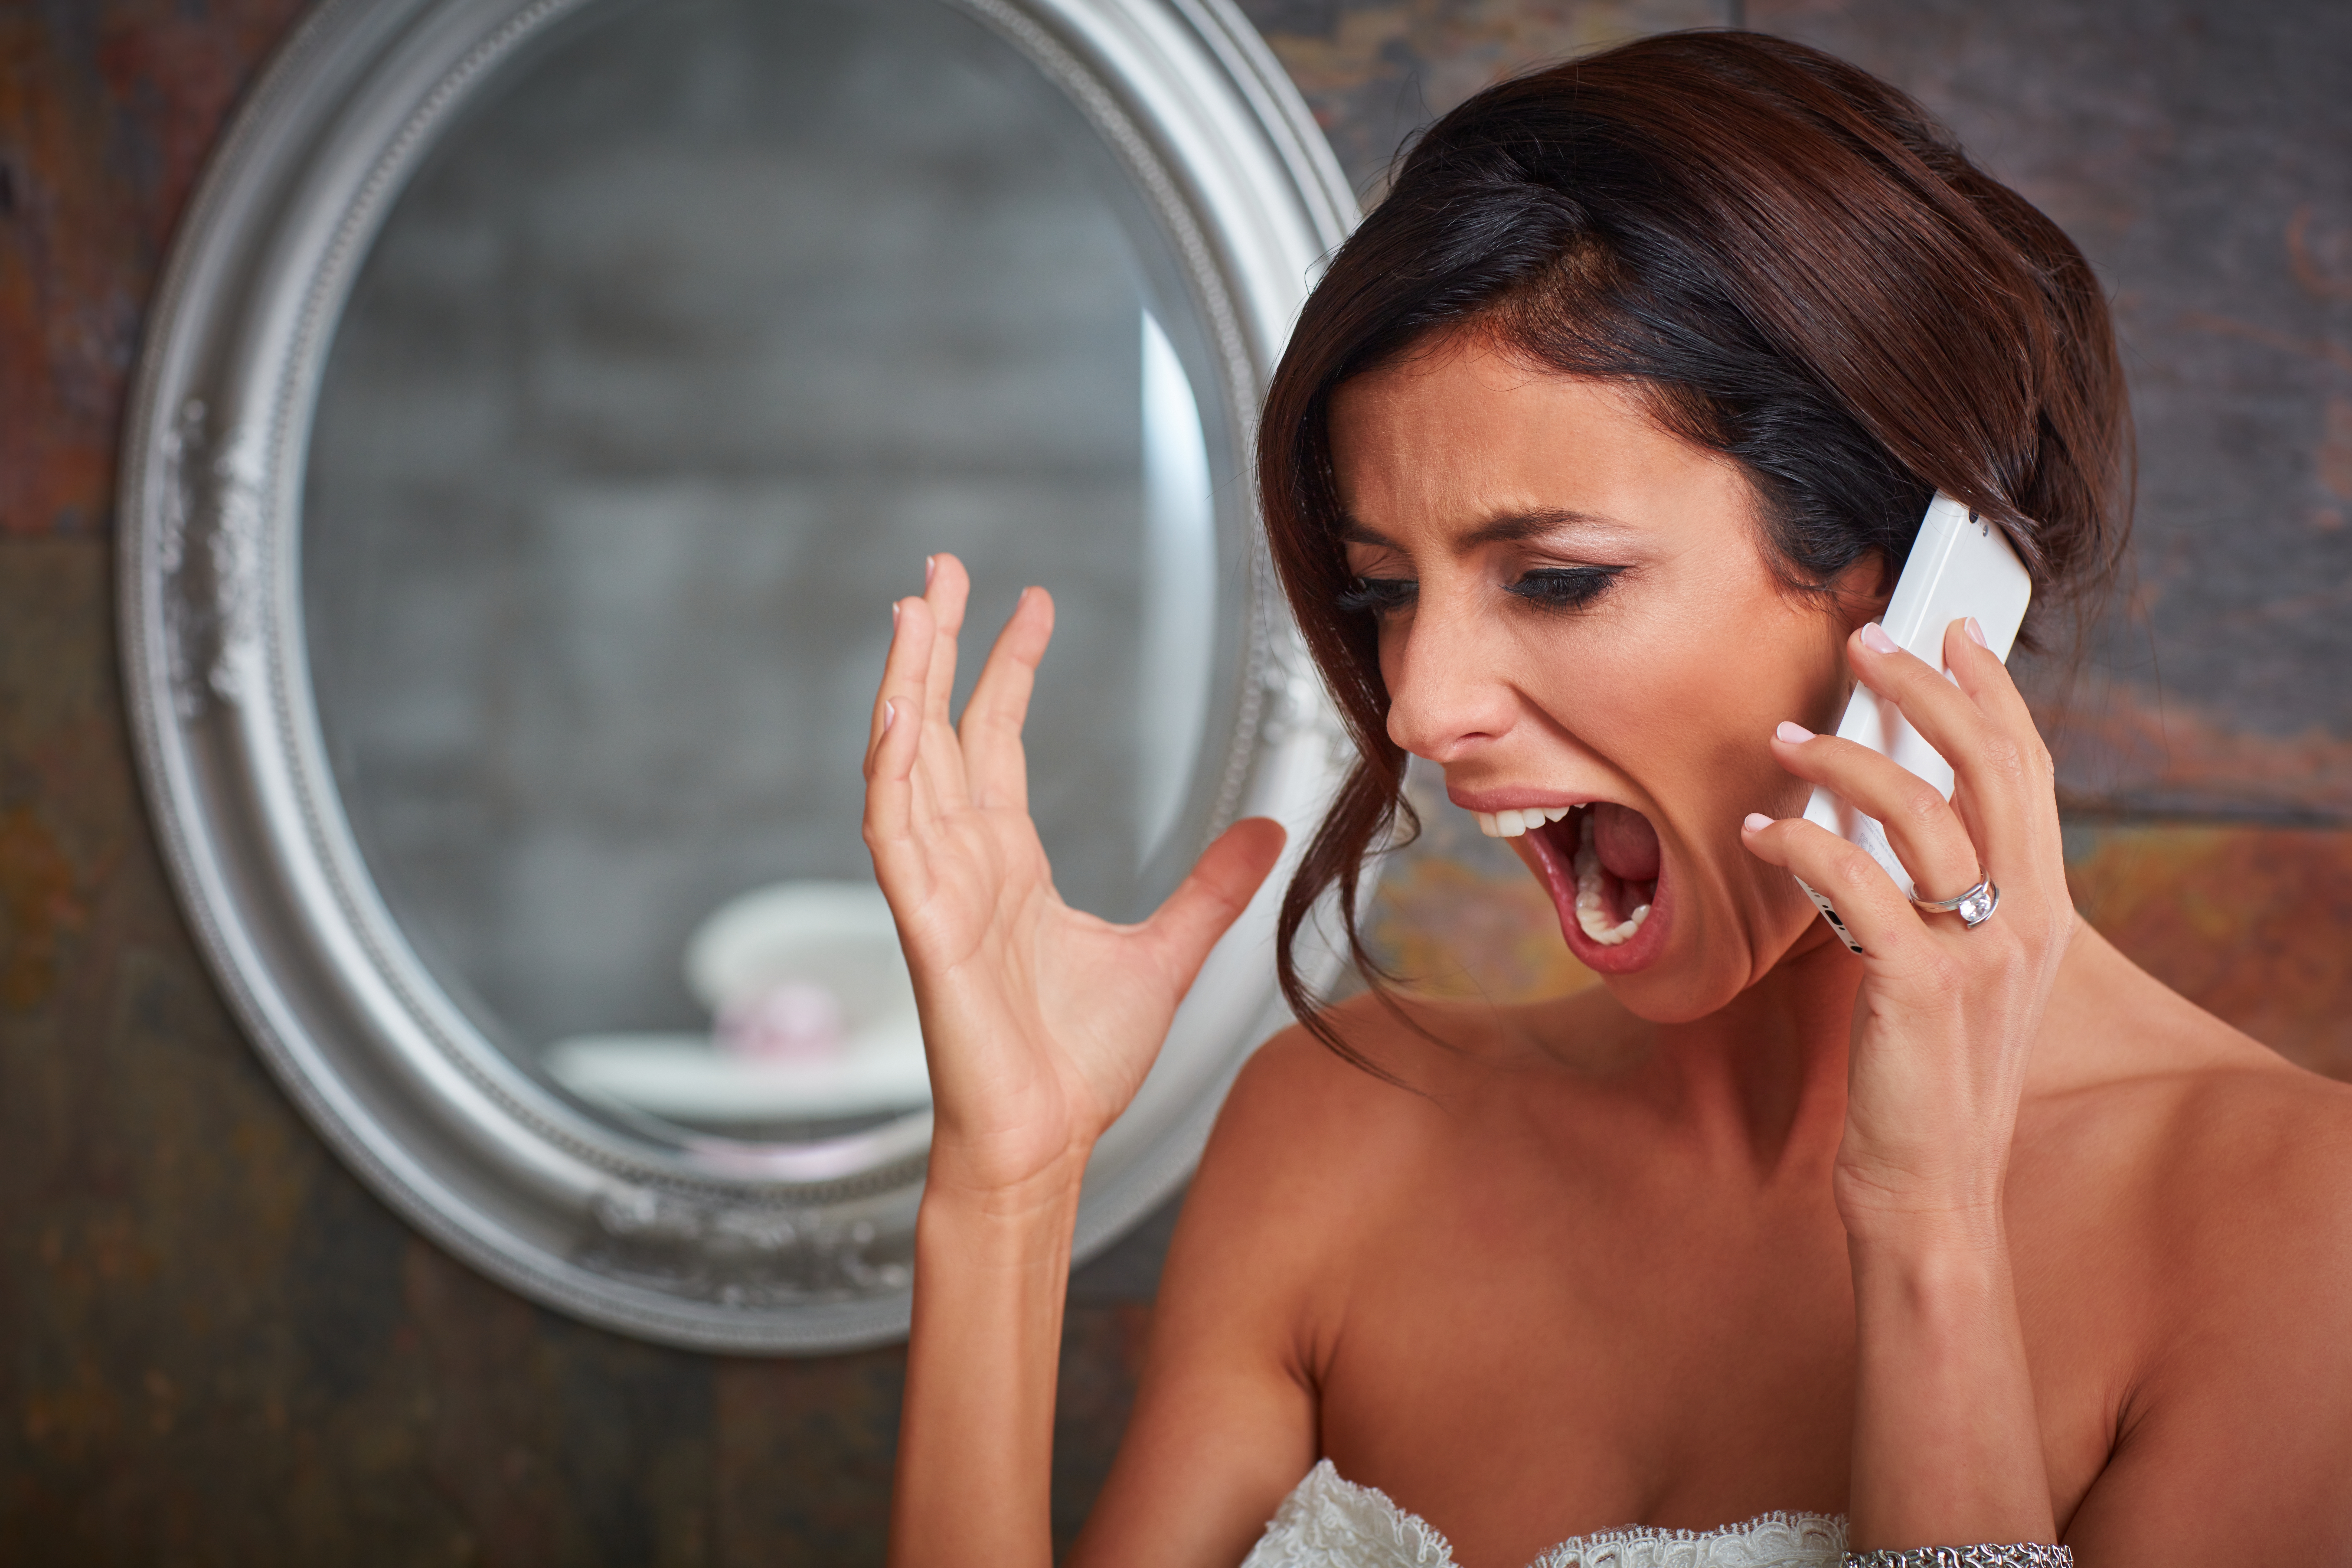 A bride screaming while talking on her phone | Source: Shutterstock